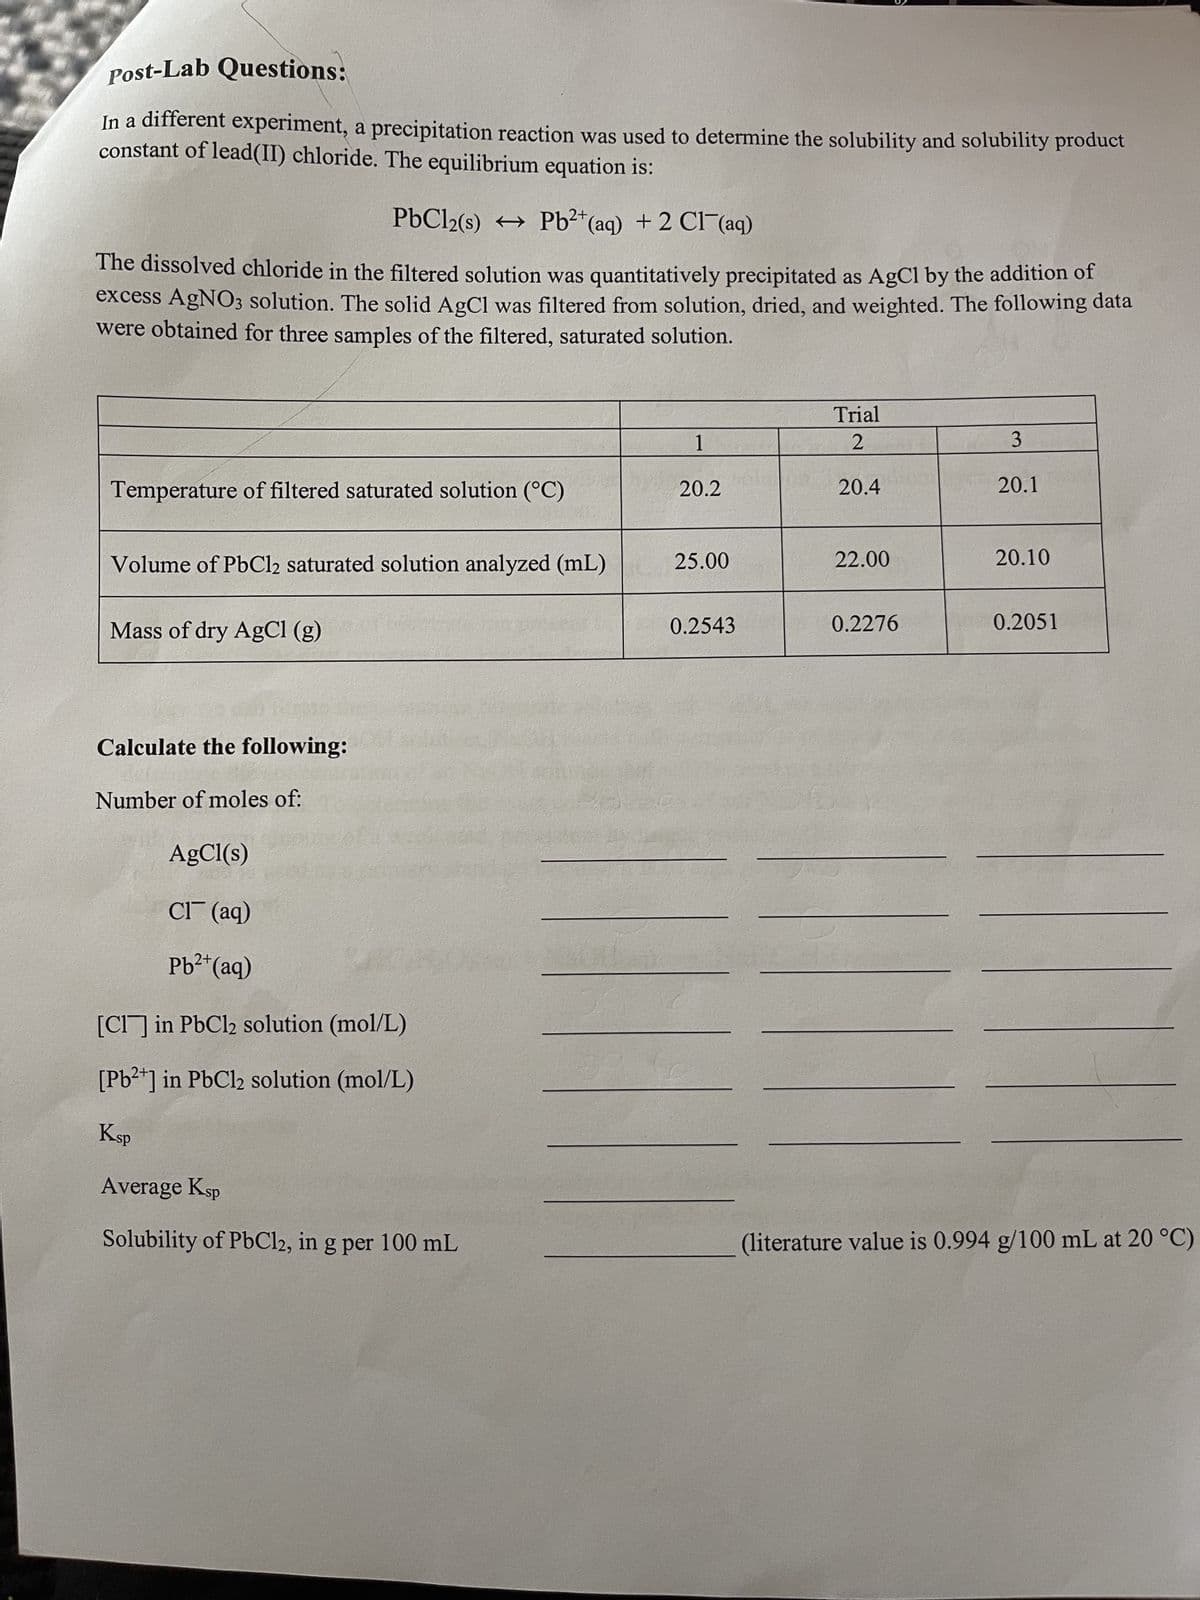 Post-Lab Questions:
In a different experiment, a precipitation reaction was used to determine the solubility and solubility product
constant of lead(II) chloride. The equilibrium equation is:
PbCl2(s) → Pb2+ (aq) + 2 Cl(aq)
The dissolved chloride in the filtered solution was quantitatively precipitated as AgCl by the addition of
excess AgNO3 solution. The solid AgCl was filtered from solution, dried, and weighted. The following data
were obtained for three samples of the filtered, saturated solution.
Temperature of filtered saturated solution (°C)
Volume of PbCl2 saturated solution analyzed (mL)
Mass of dry AgCl (g)
Calculate the following:
Number of moles of:
AgCl(s)
421
Cl(aq)
2+
Pb²+ (aq)
[Cl] in PbCl2 solution (mol/L)
[Pb²+] in PbCl2 solution (mol/L)
Ksp
Average Ksp
Solubility of PbCl2, in g per 100 mL
1
20.2
25.00
0.2543
Trial
2
20.4
22.00
0.2276
3
20.1
20.10
0.2051
(literature value is 0.994 g/100 mL at 20 °C)